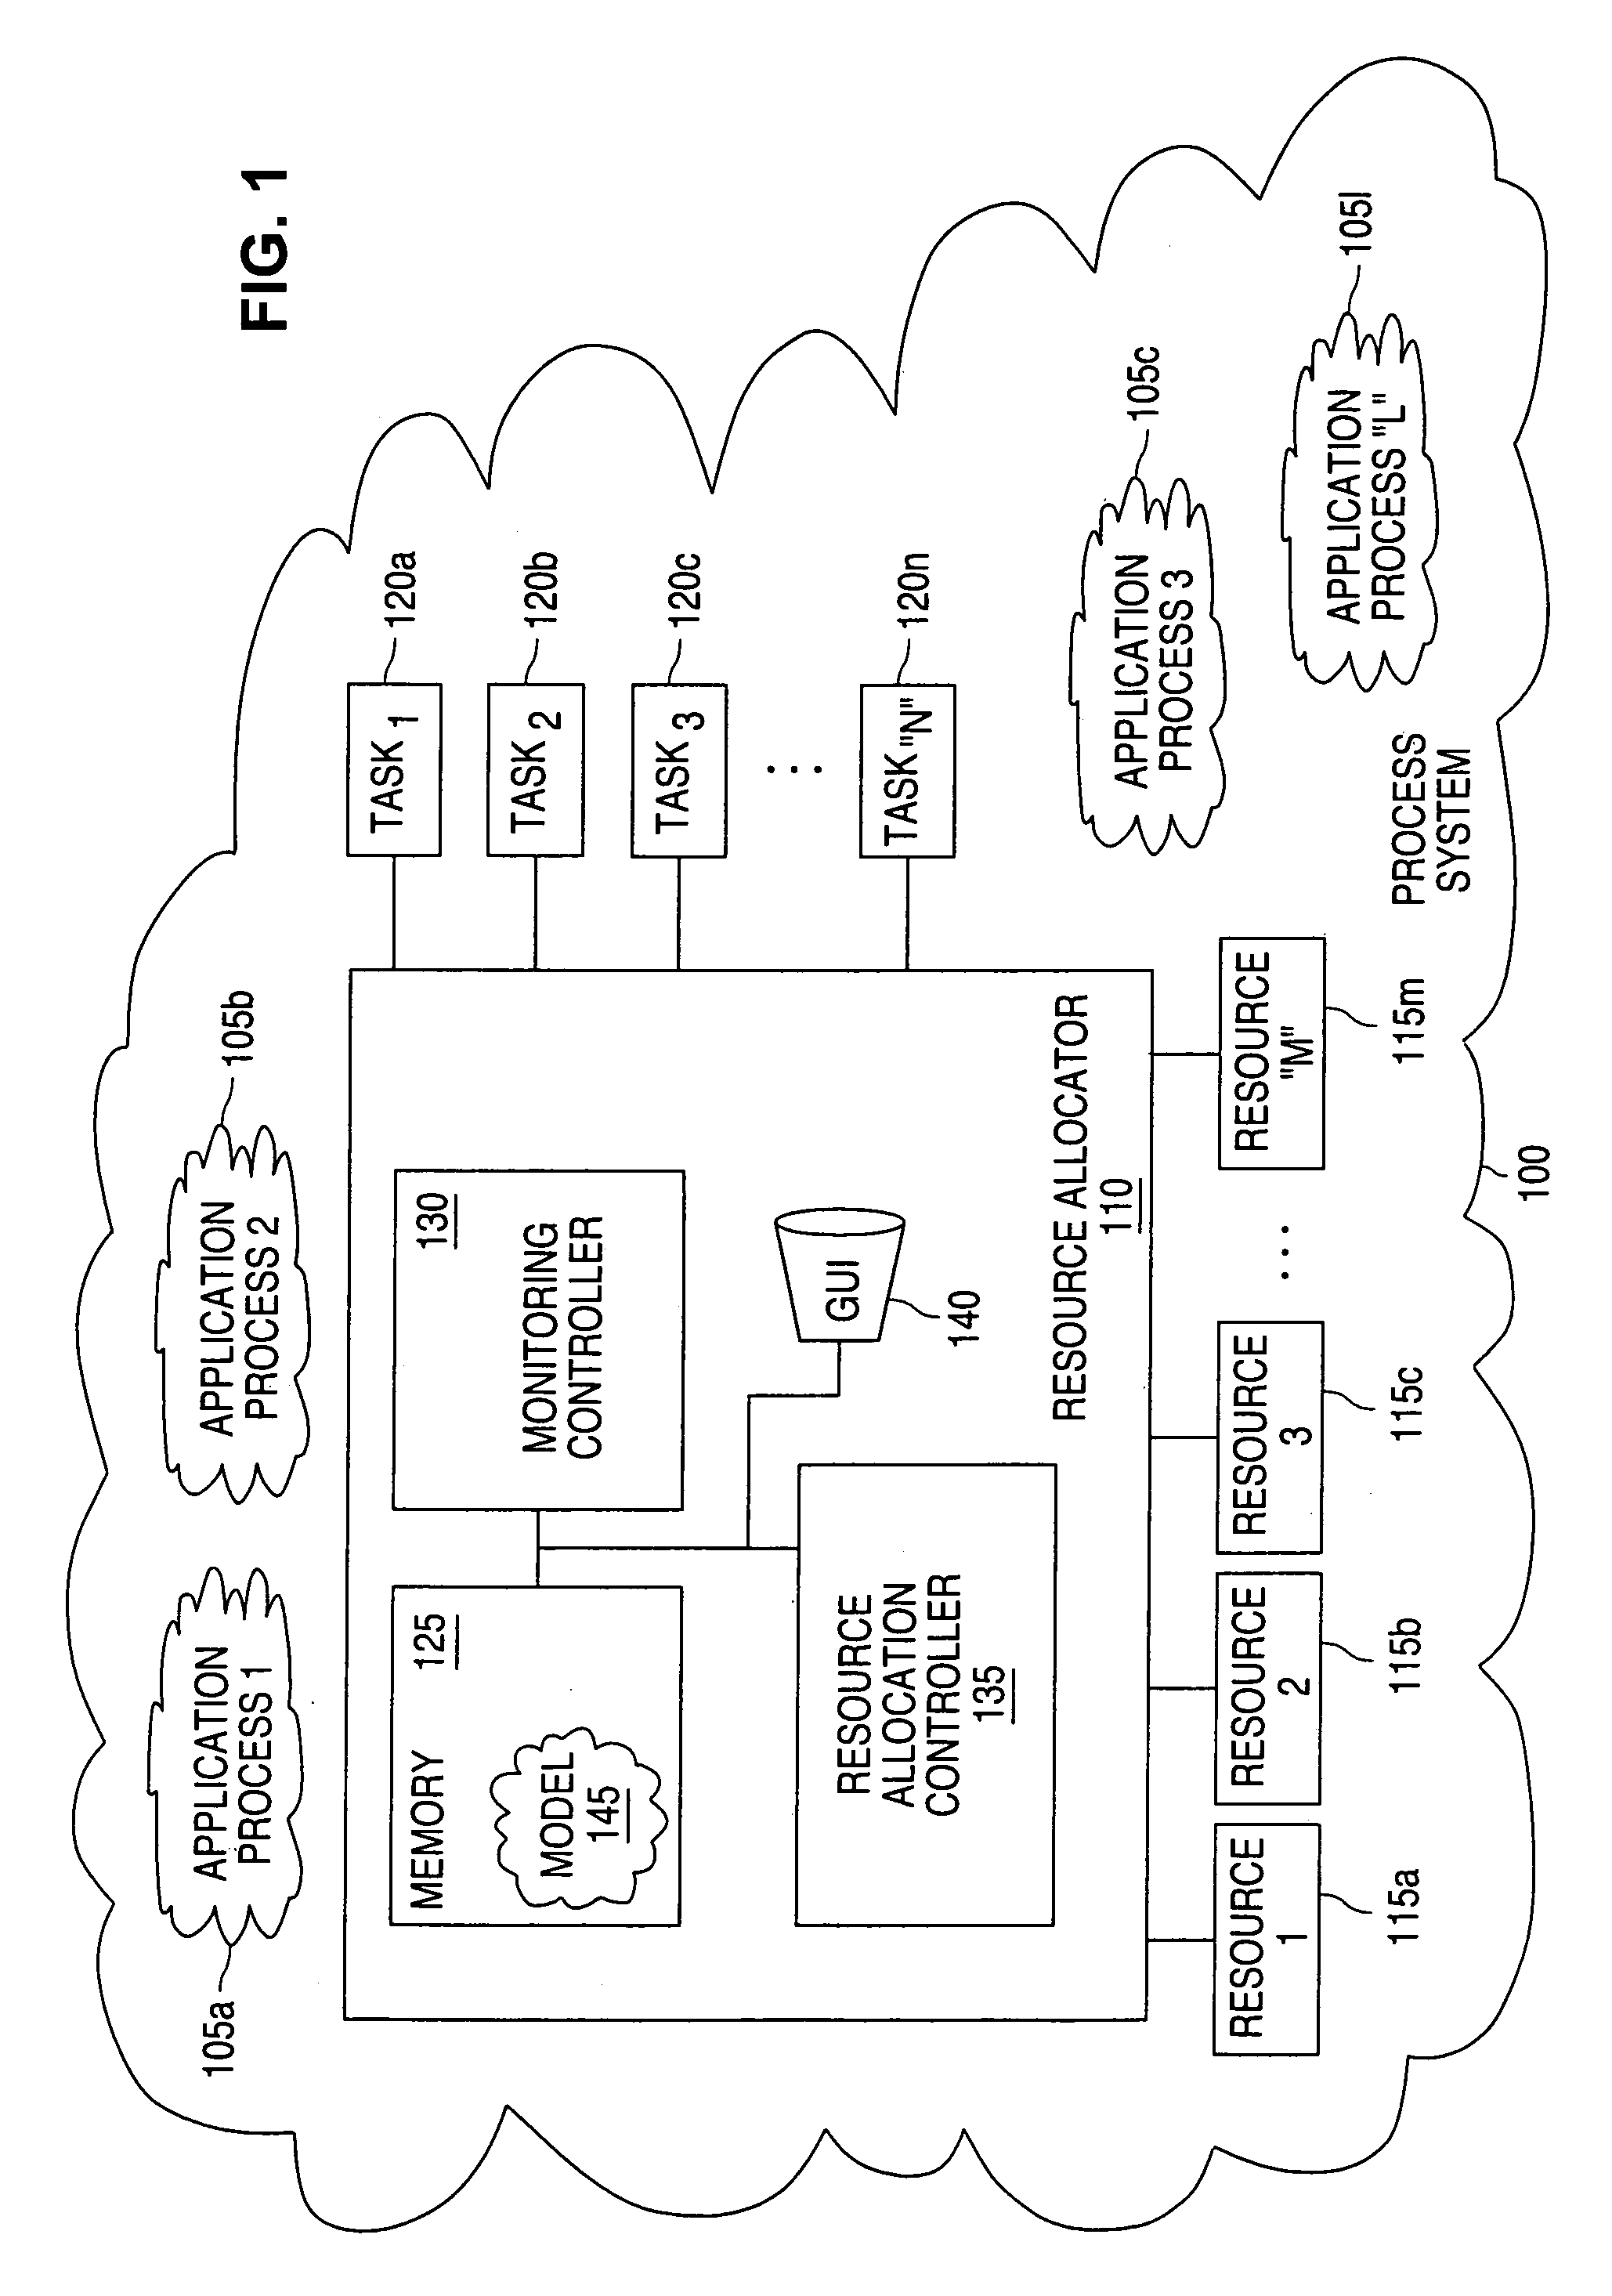 System and method for allocating multi-function resources for a wetdeck process in semiconductor wafer fabrication